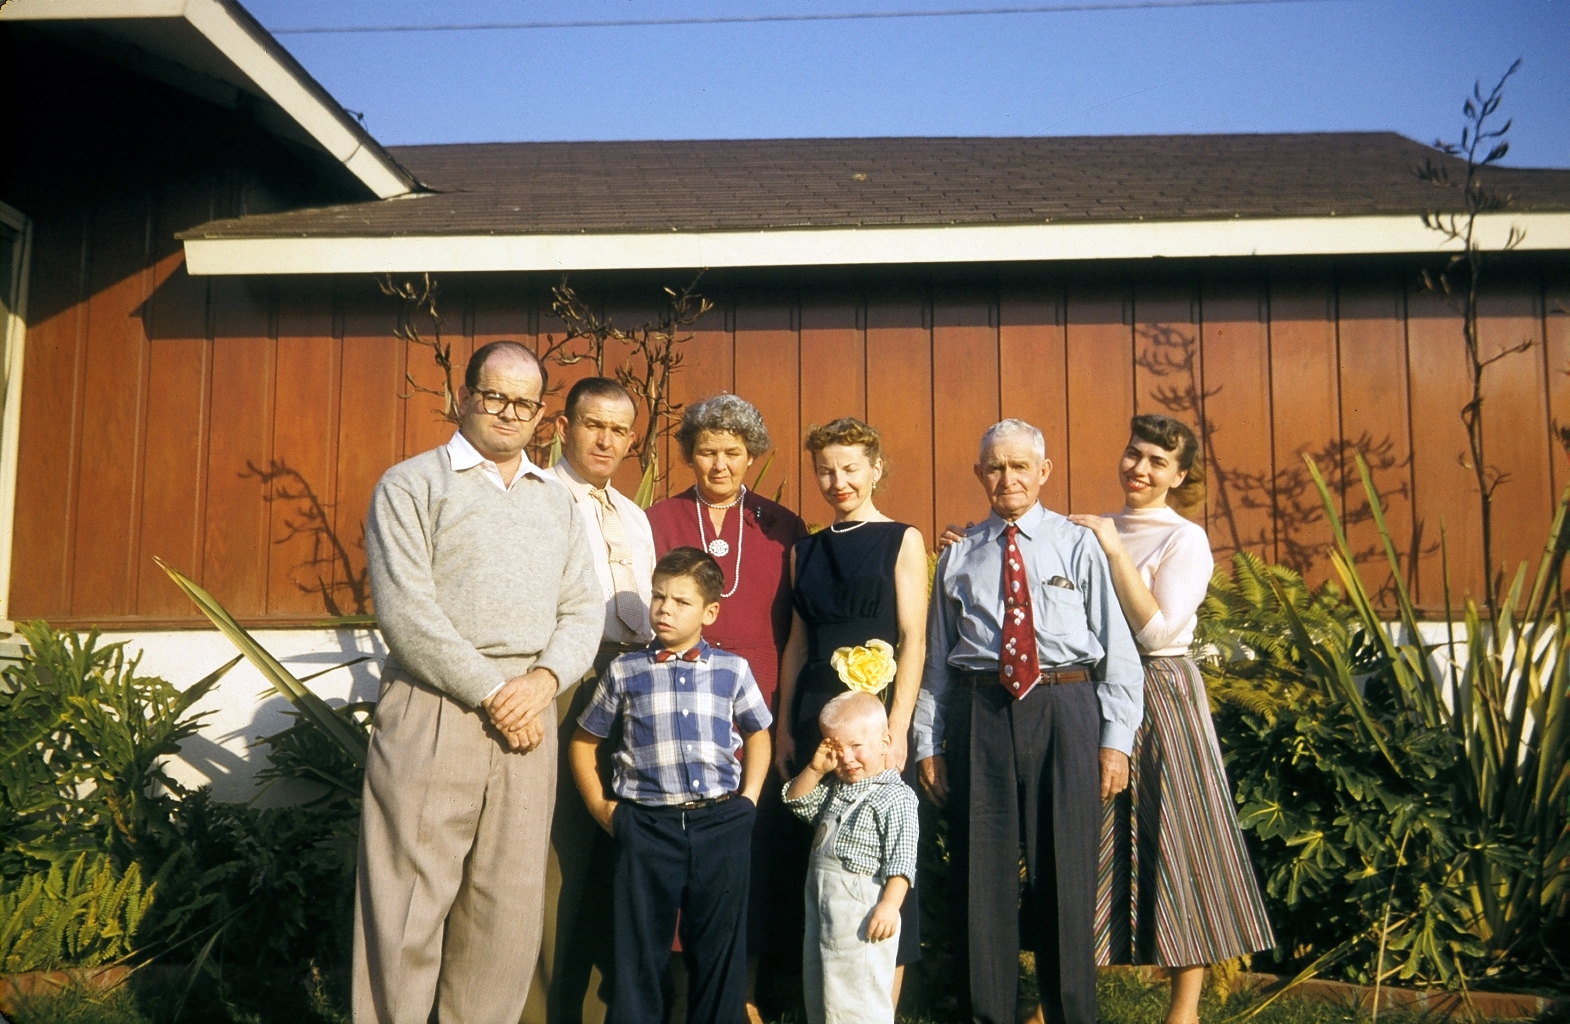 This was taken at my uncle's house near Venice Beach, California. I was about 3, so this would be 1958. From the left, my uncle (Dad's brother), a biochemist of some renown; Dad's other brother; their mom; my mom (squinting in the sun); my granddad (father of the two guys on the left); and last but not least, my aunt (wife of the biochemist), who was one of the finest people I knew. I do not know what became of her after the early '70s. Finally, the boys. The bigger one eventually became really wealthy, an owner of a professional sports team, and had legal trouble. The smaller one is yours truly, squinting like his mom! This was taken at a time when my little extended family was not only alive but still functional. As usual, the cameraman was Dad! Back then, he had a 35mm camera he bought in Japan on leave from fighting in Korea. Some of these peeps have appeared in my Christmastime pictures, posted earlier. Enjoy. View full size.